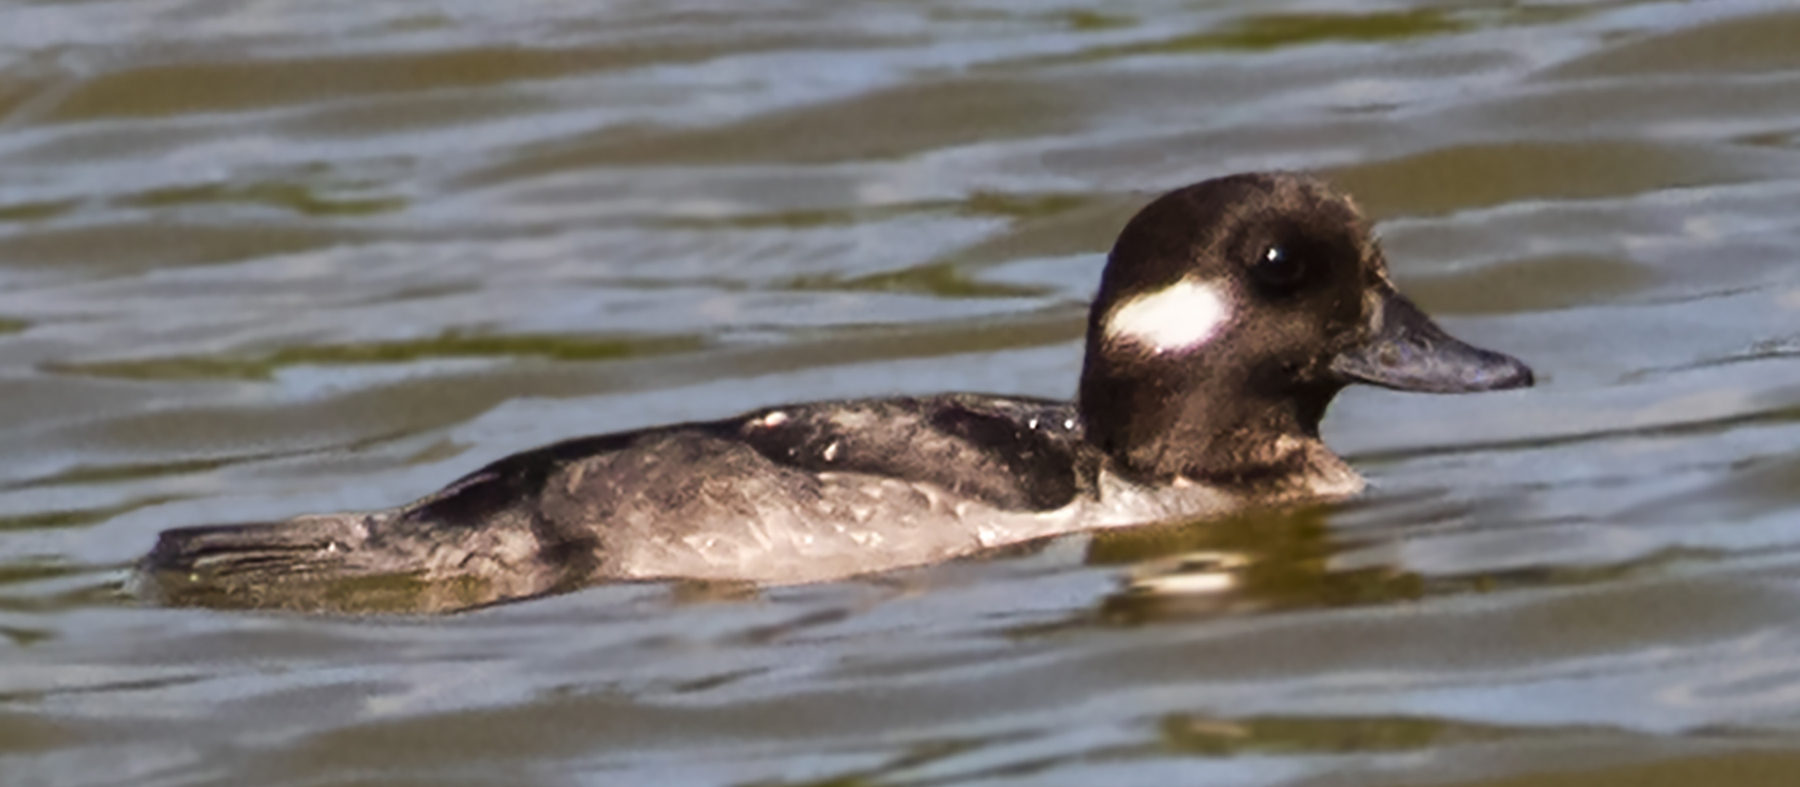 An unusual visitor was spotted on St. John – a female bufflehead duck. (Photo by Gail Karlsson)